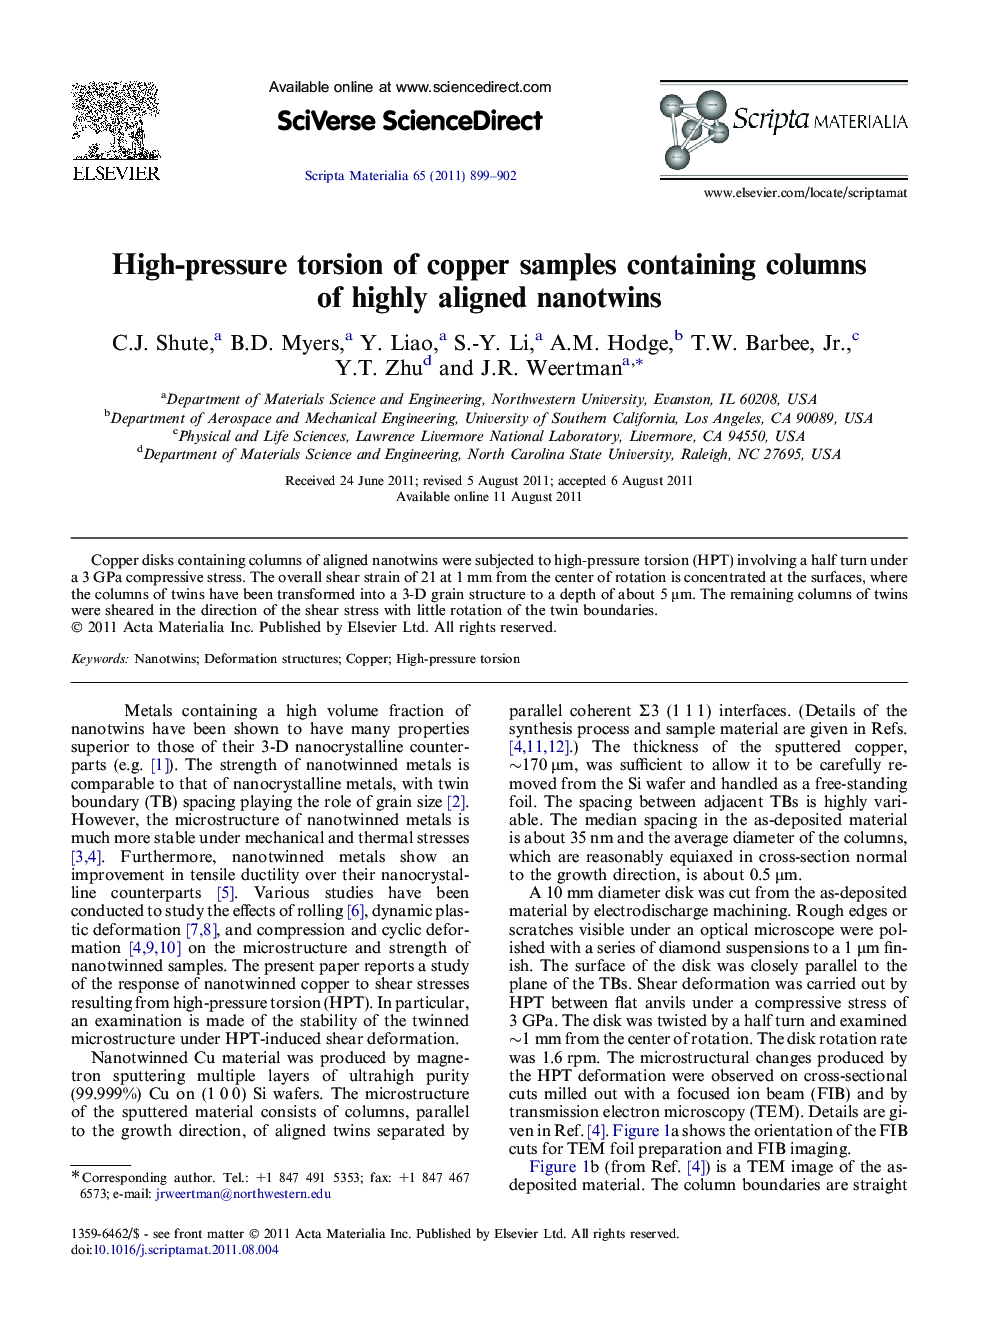 High-pressure torsion of copper samples containing columns of highly aligned nanotwins